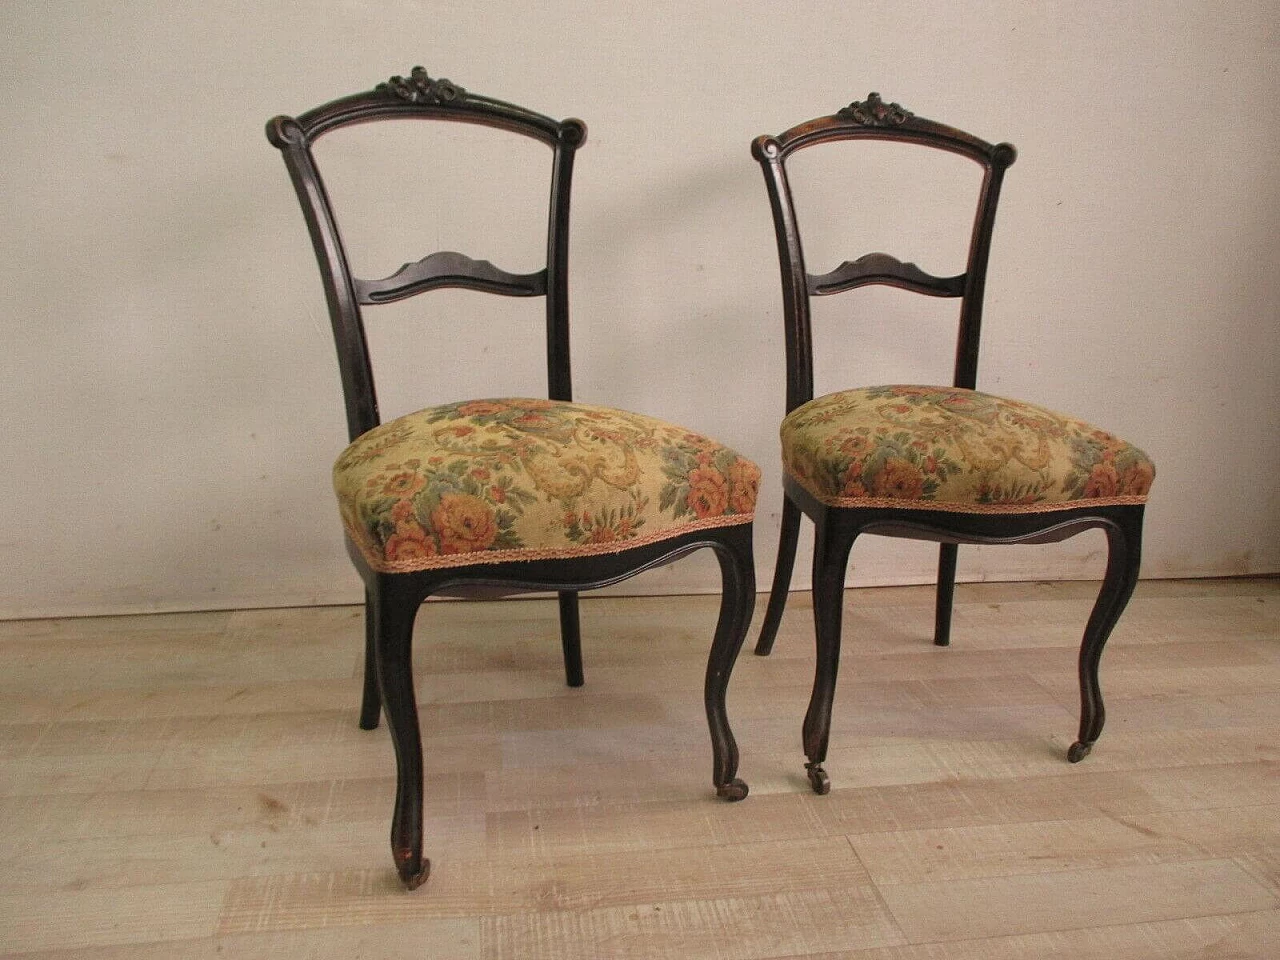 Pair of Umbertine chairs with casters in ebonised solid walnut and Gobelin fabric, 19th century 2